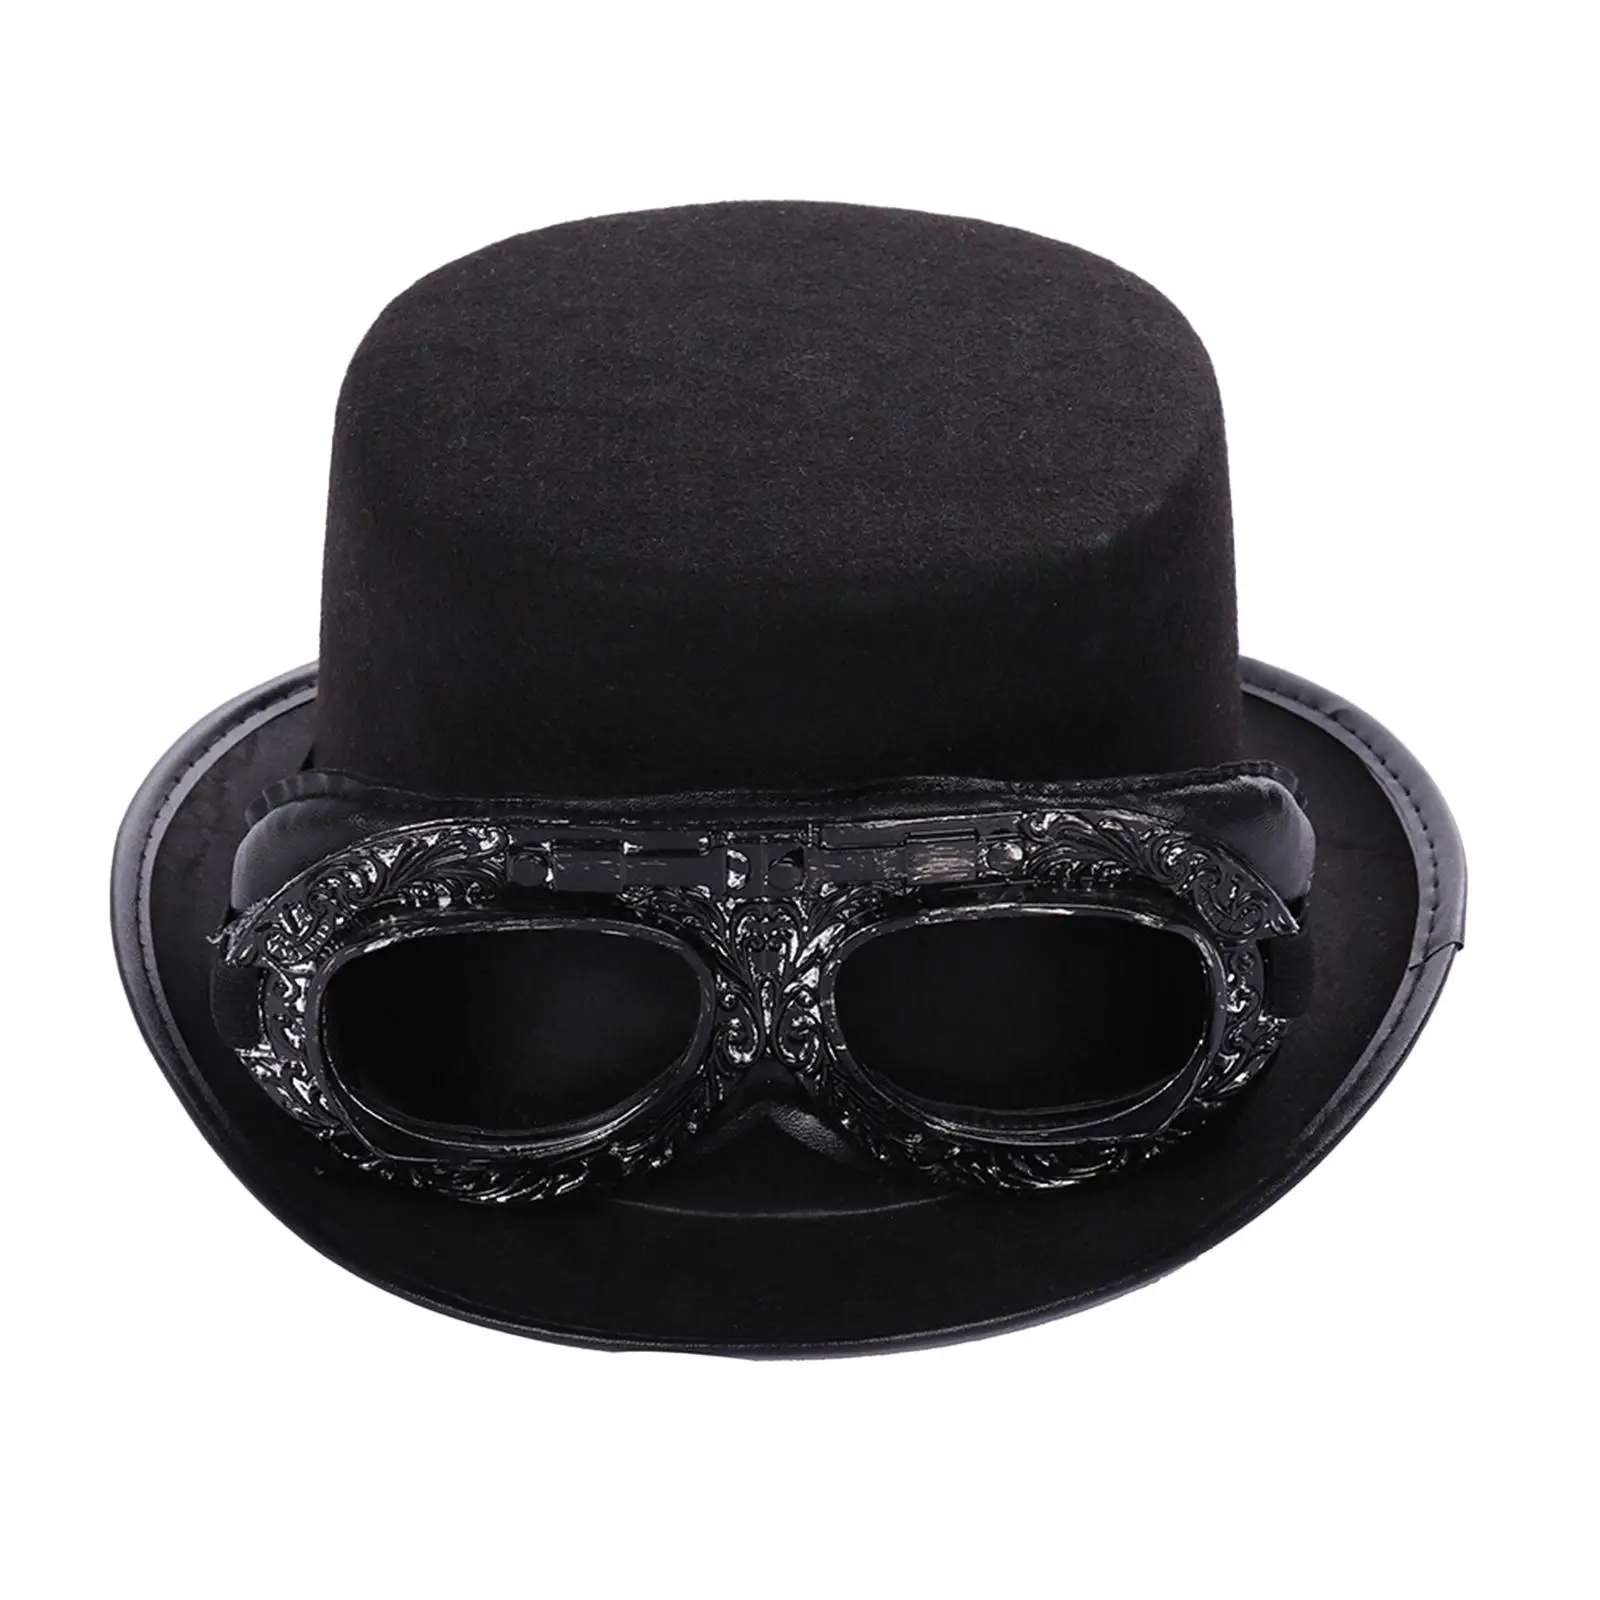 Deluxe Steampunk Top Hat with Goggles Gothic Vintage Style Formal Costume Top Hat Novelty Headgear for Men Women Dress Party